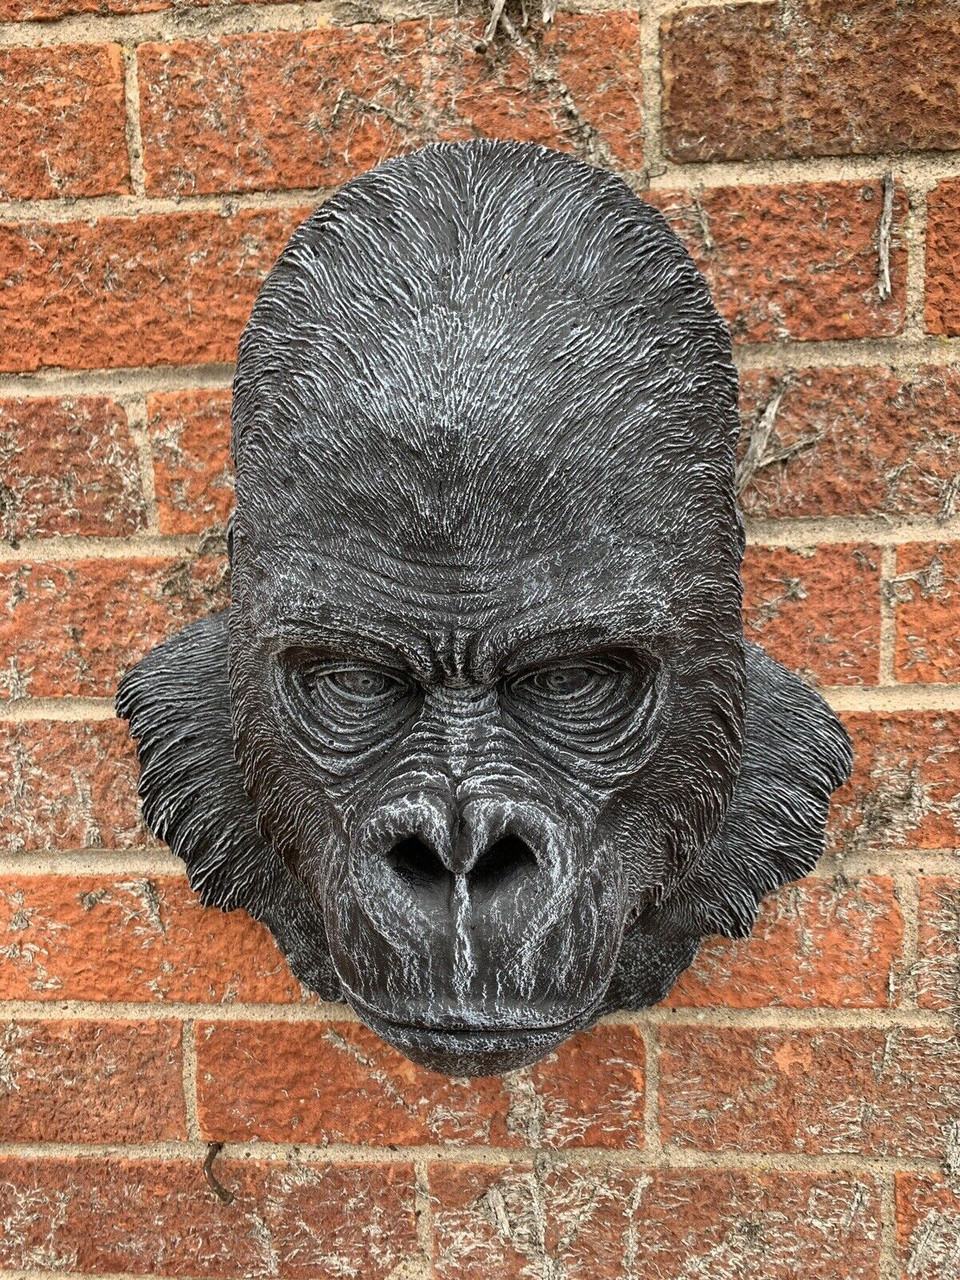 STONE GARDEN LARGE DETAILED GORILLA APE HEAD WALL HANGING PLAQUE ORNAMENT